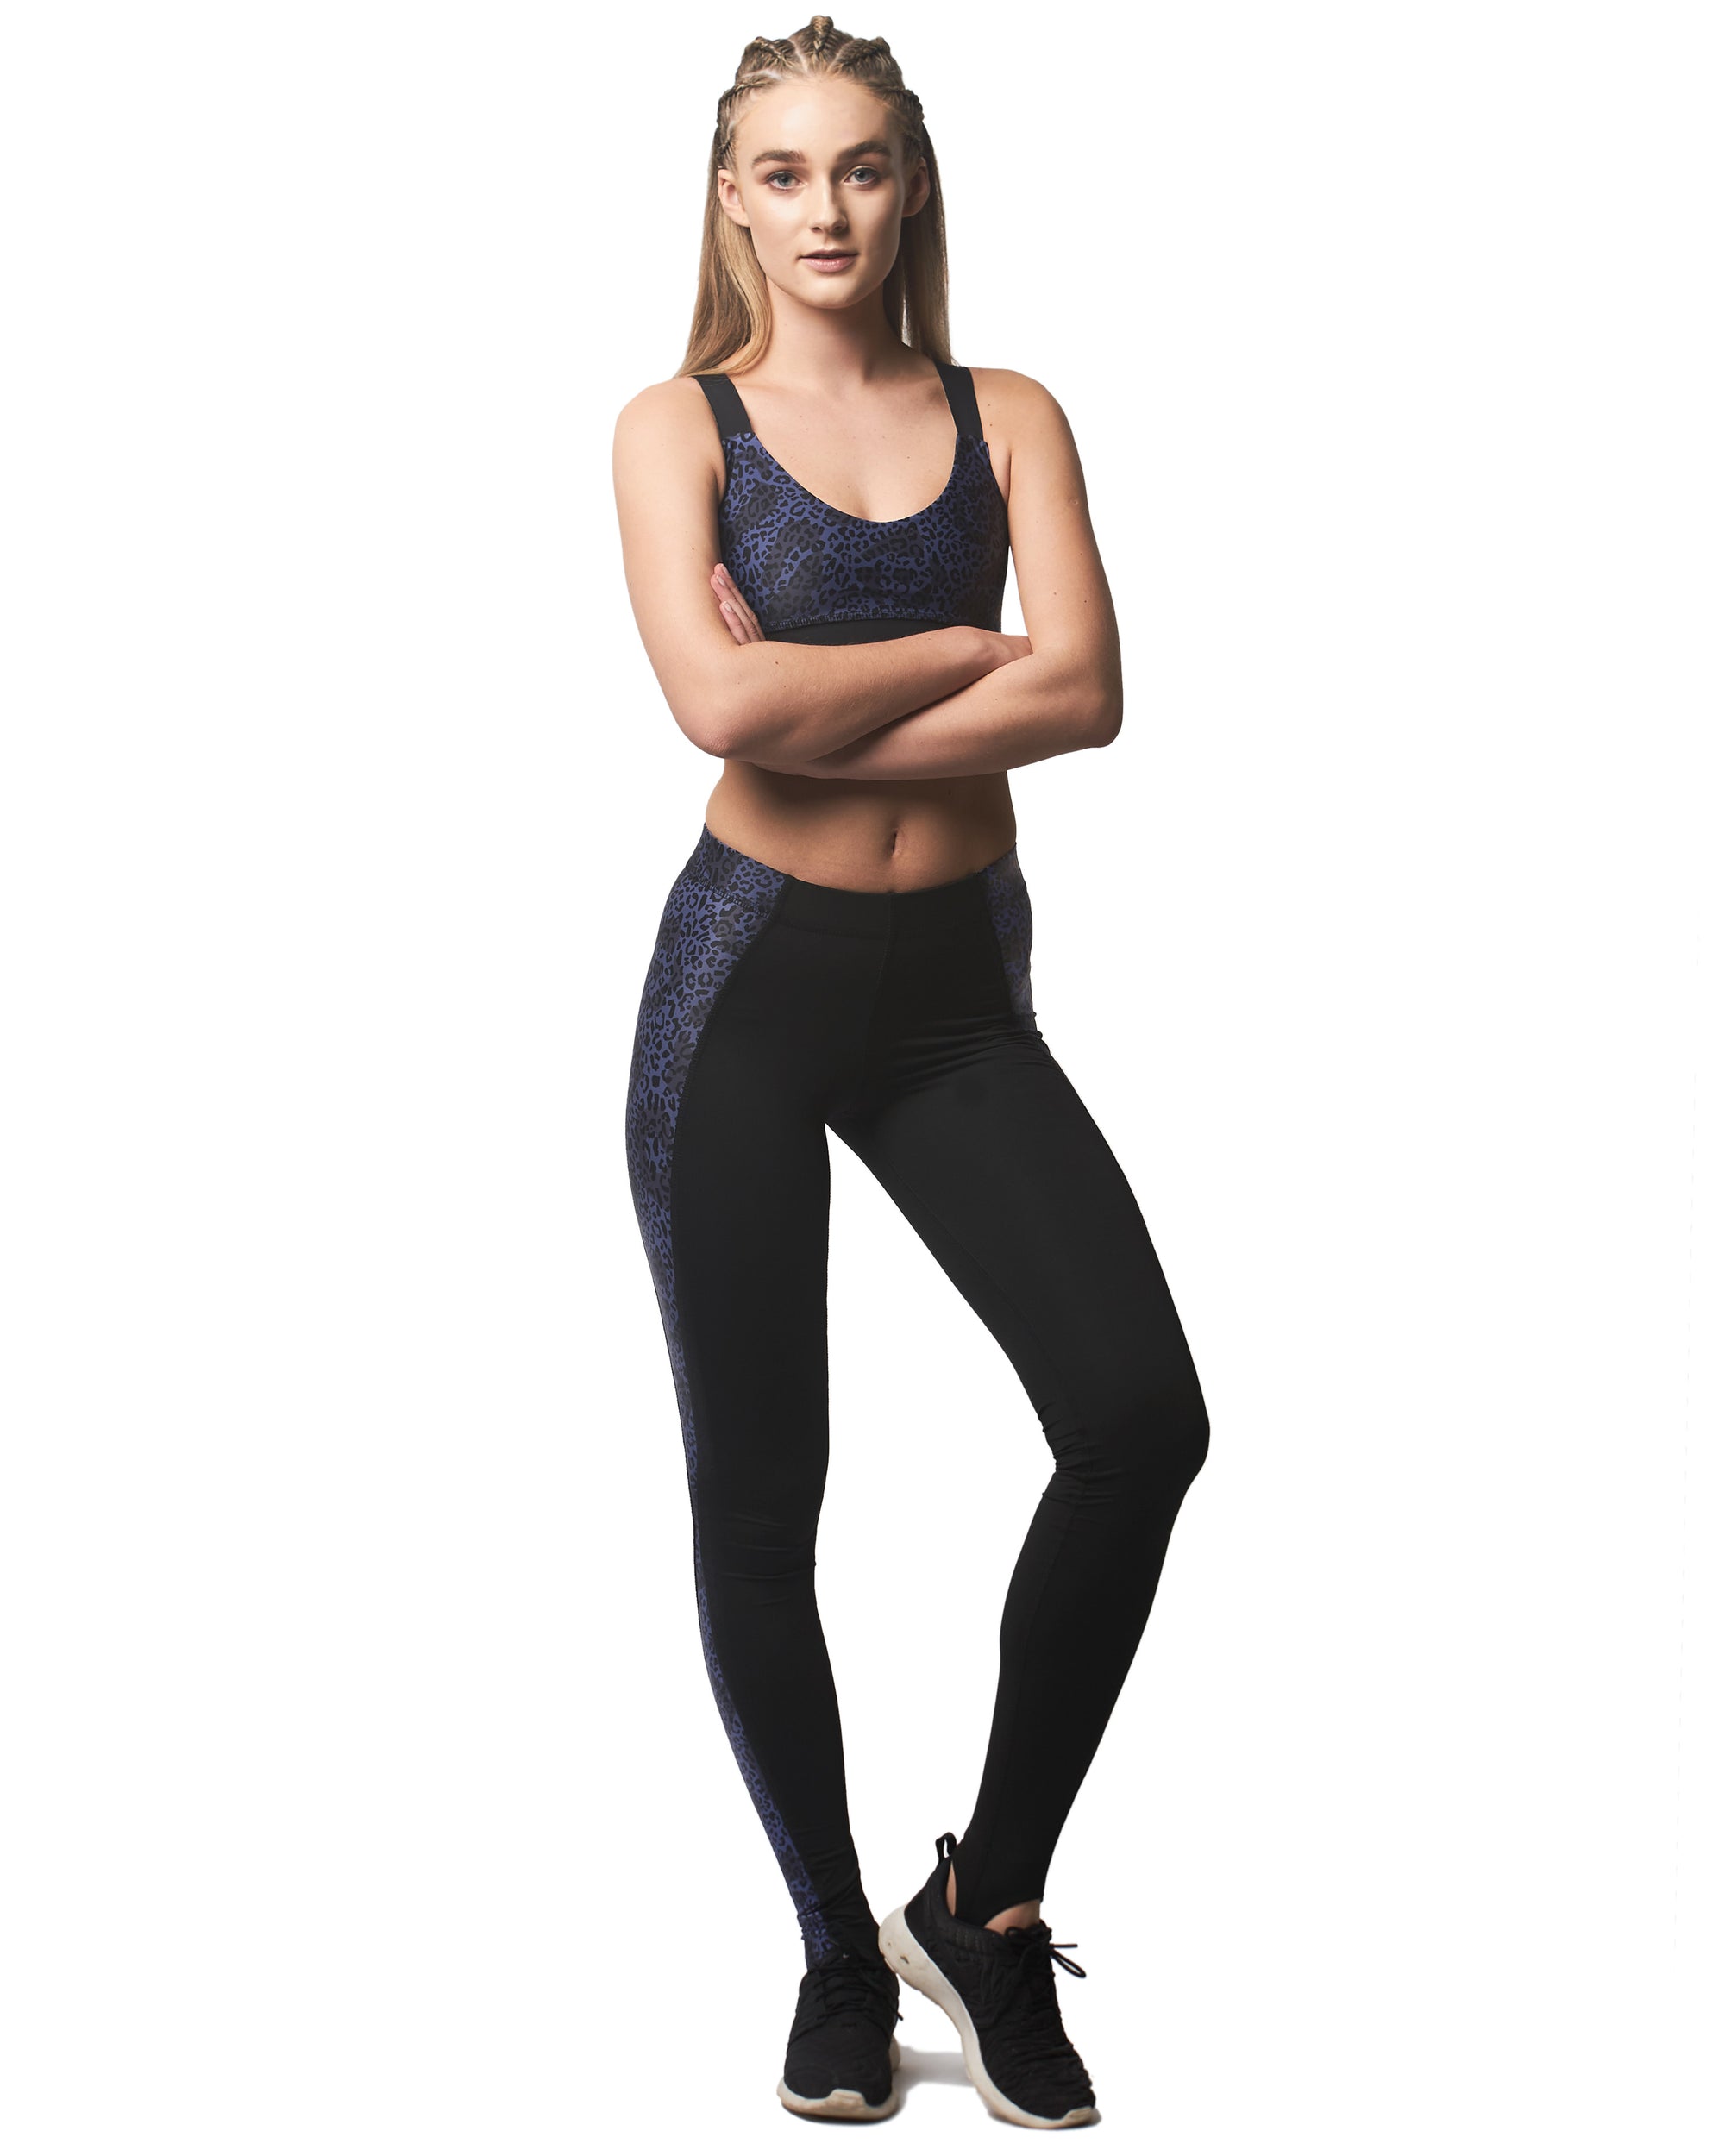 Workout leggings - Black and subtle navy blue leopard print - Fashionable  performance sports leggings for running, jogging, yoga, pilates and gym -  LPRD